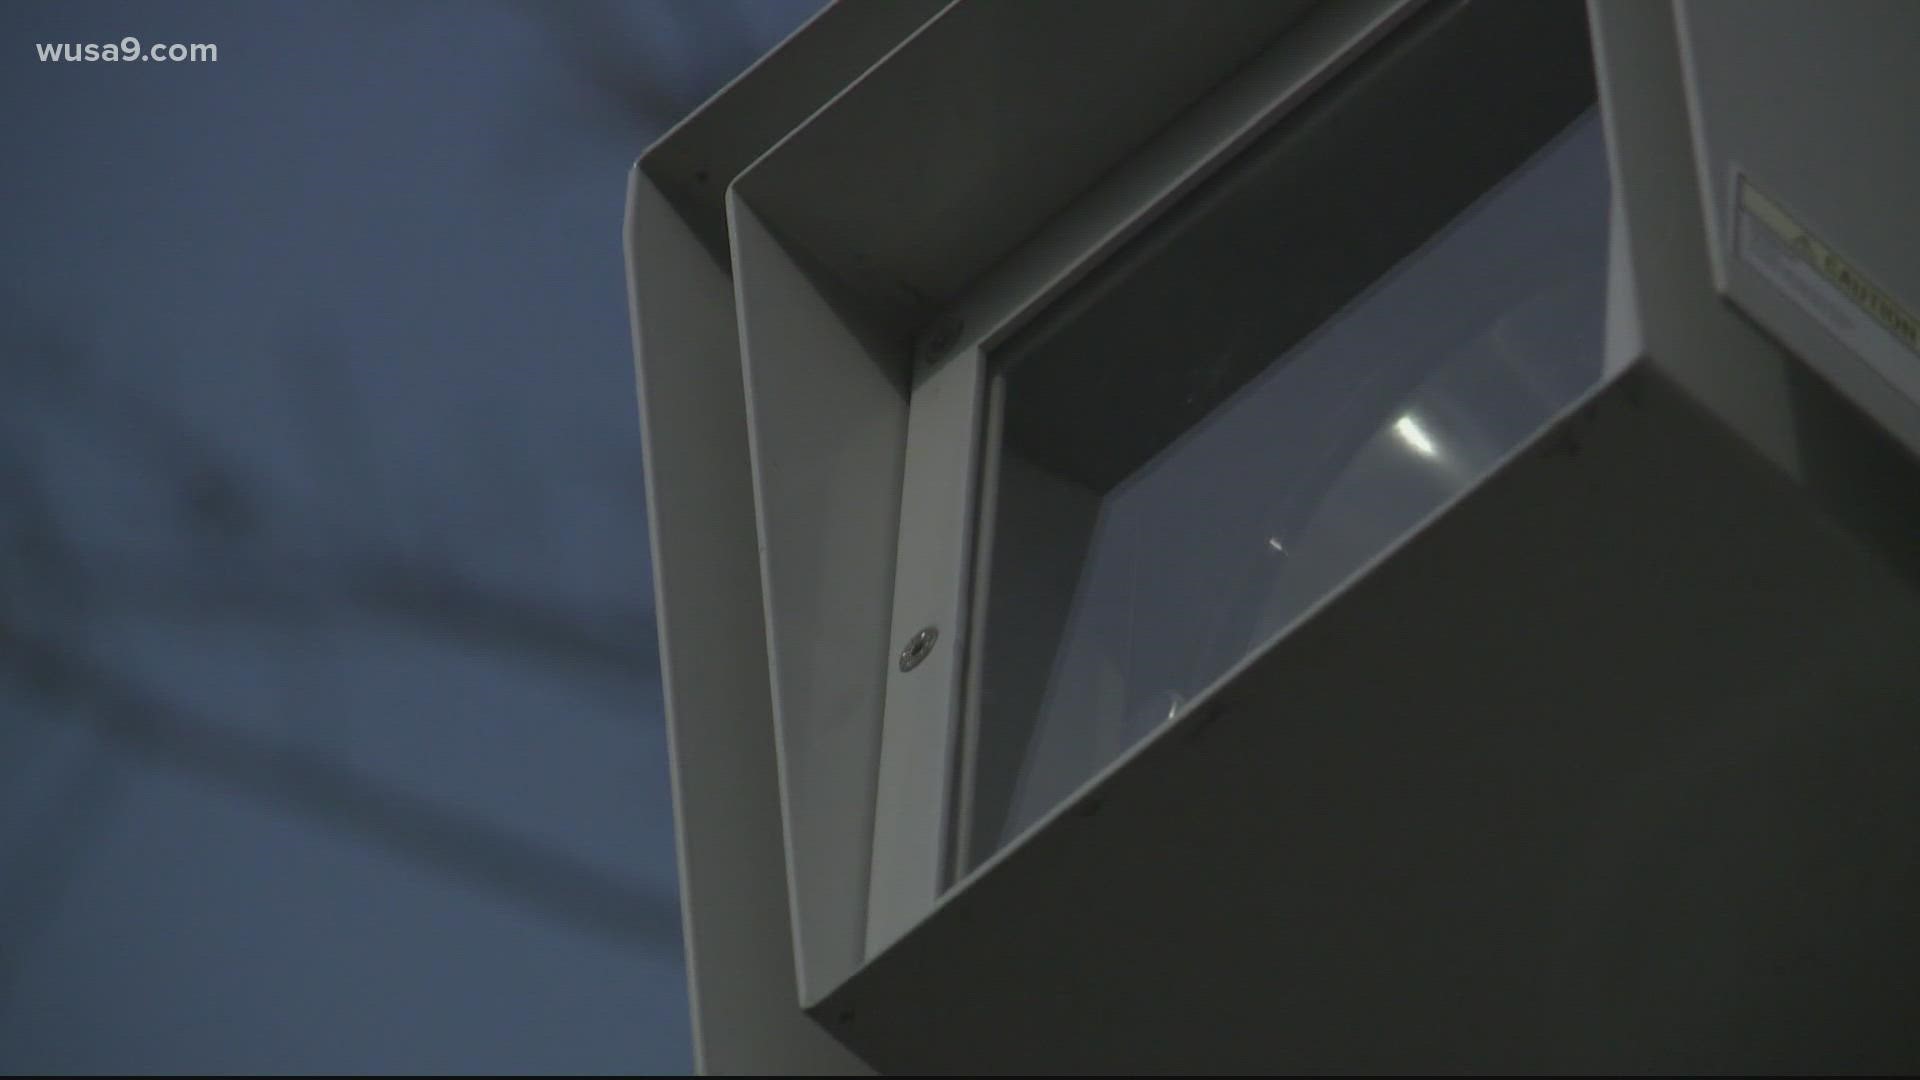 Arlington County Board is now considering installing 10 speed cameras around schools and fining people $50 for breaking the law.